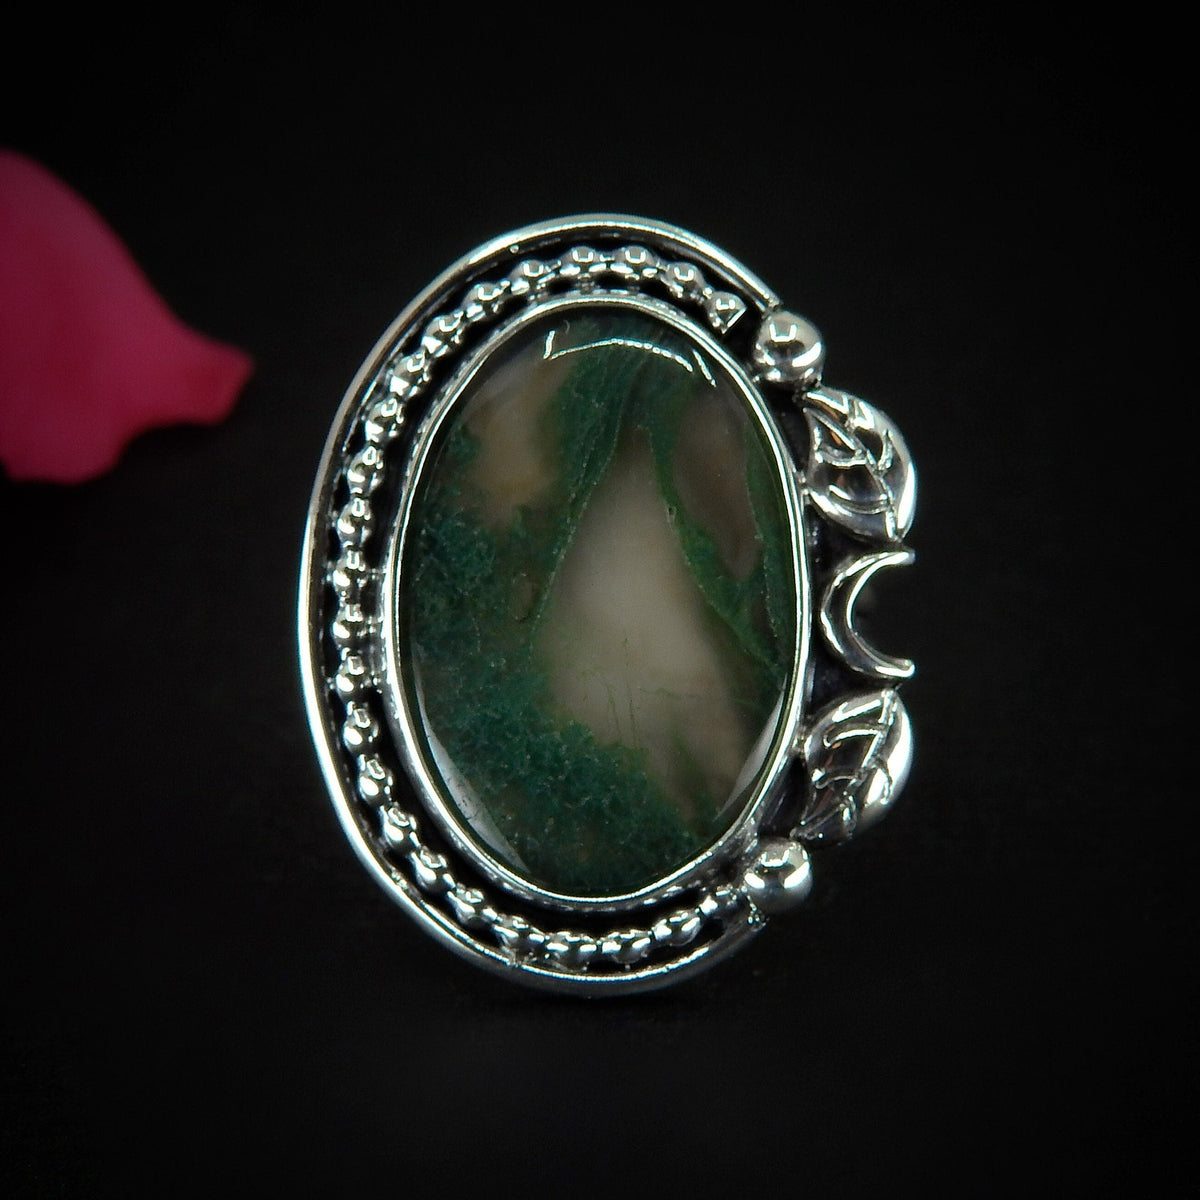 Moss Agate Ring - Size 7 1/4 - Sterling Silver - Moss Agate Statement Ring - Crescent Moon Ring - Tree Agate Leaf Ring, Handmade Forest Ring